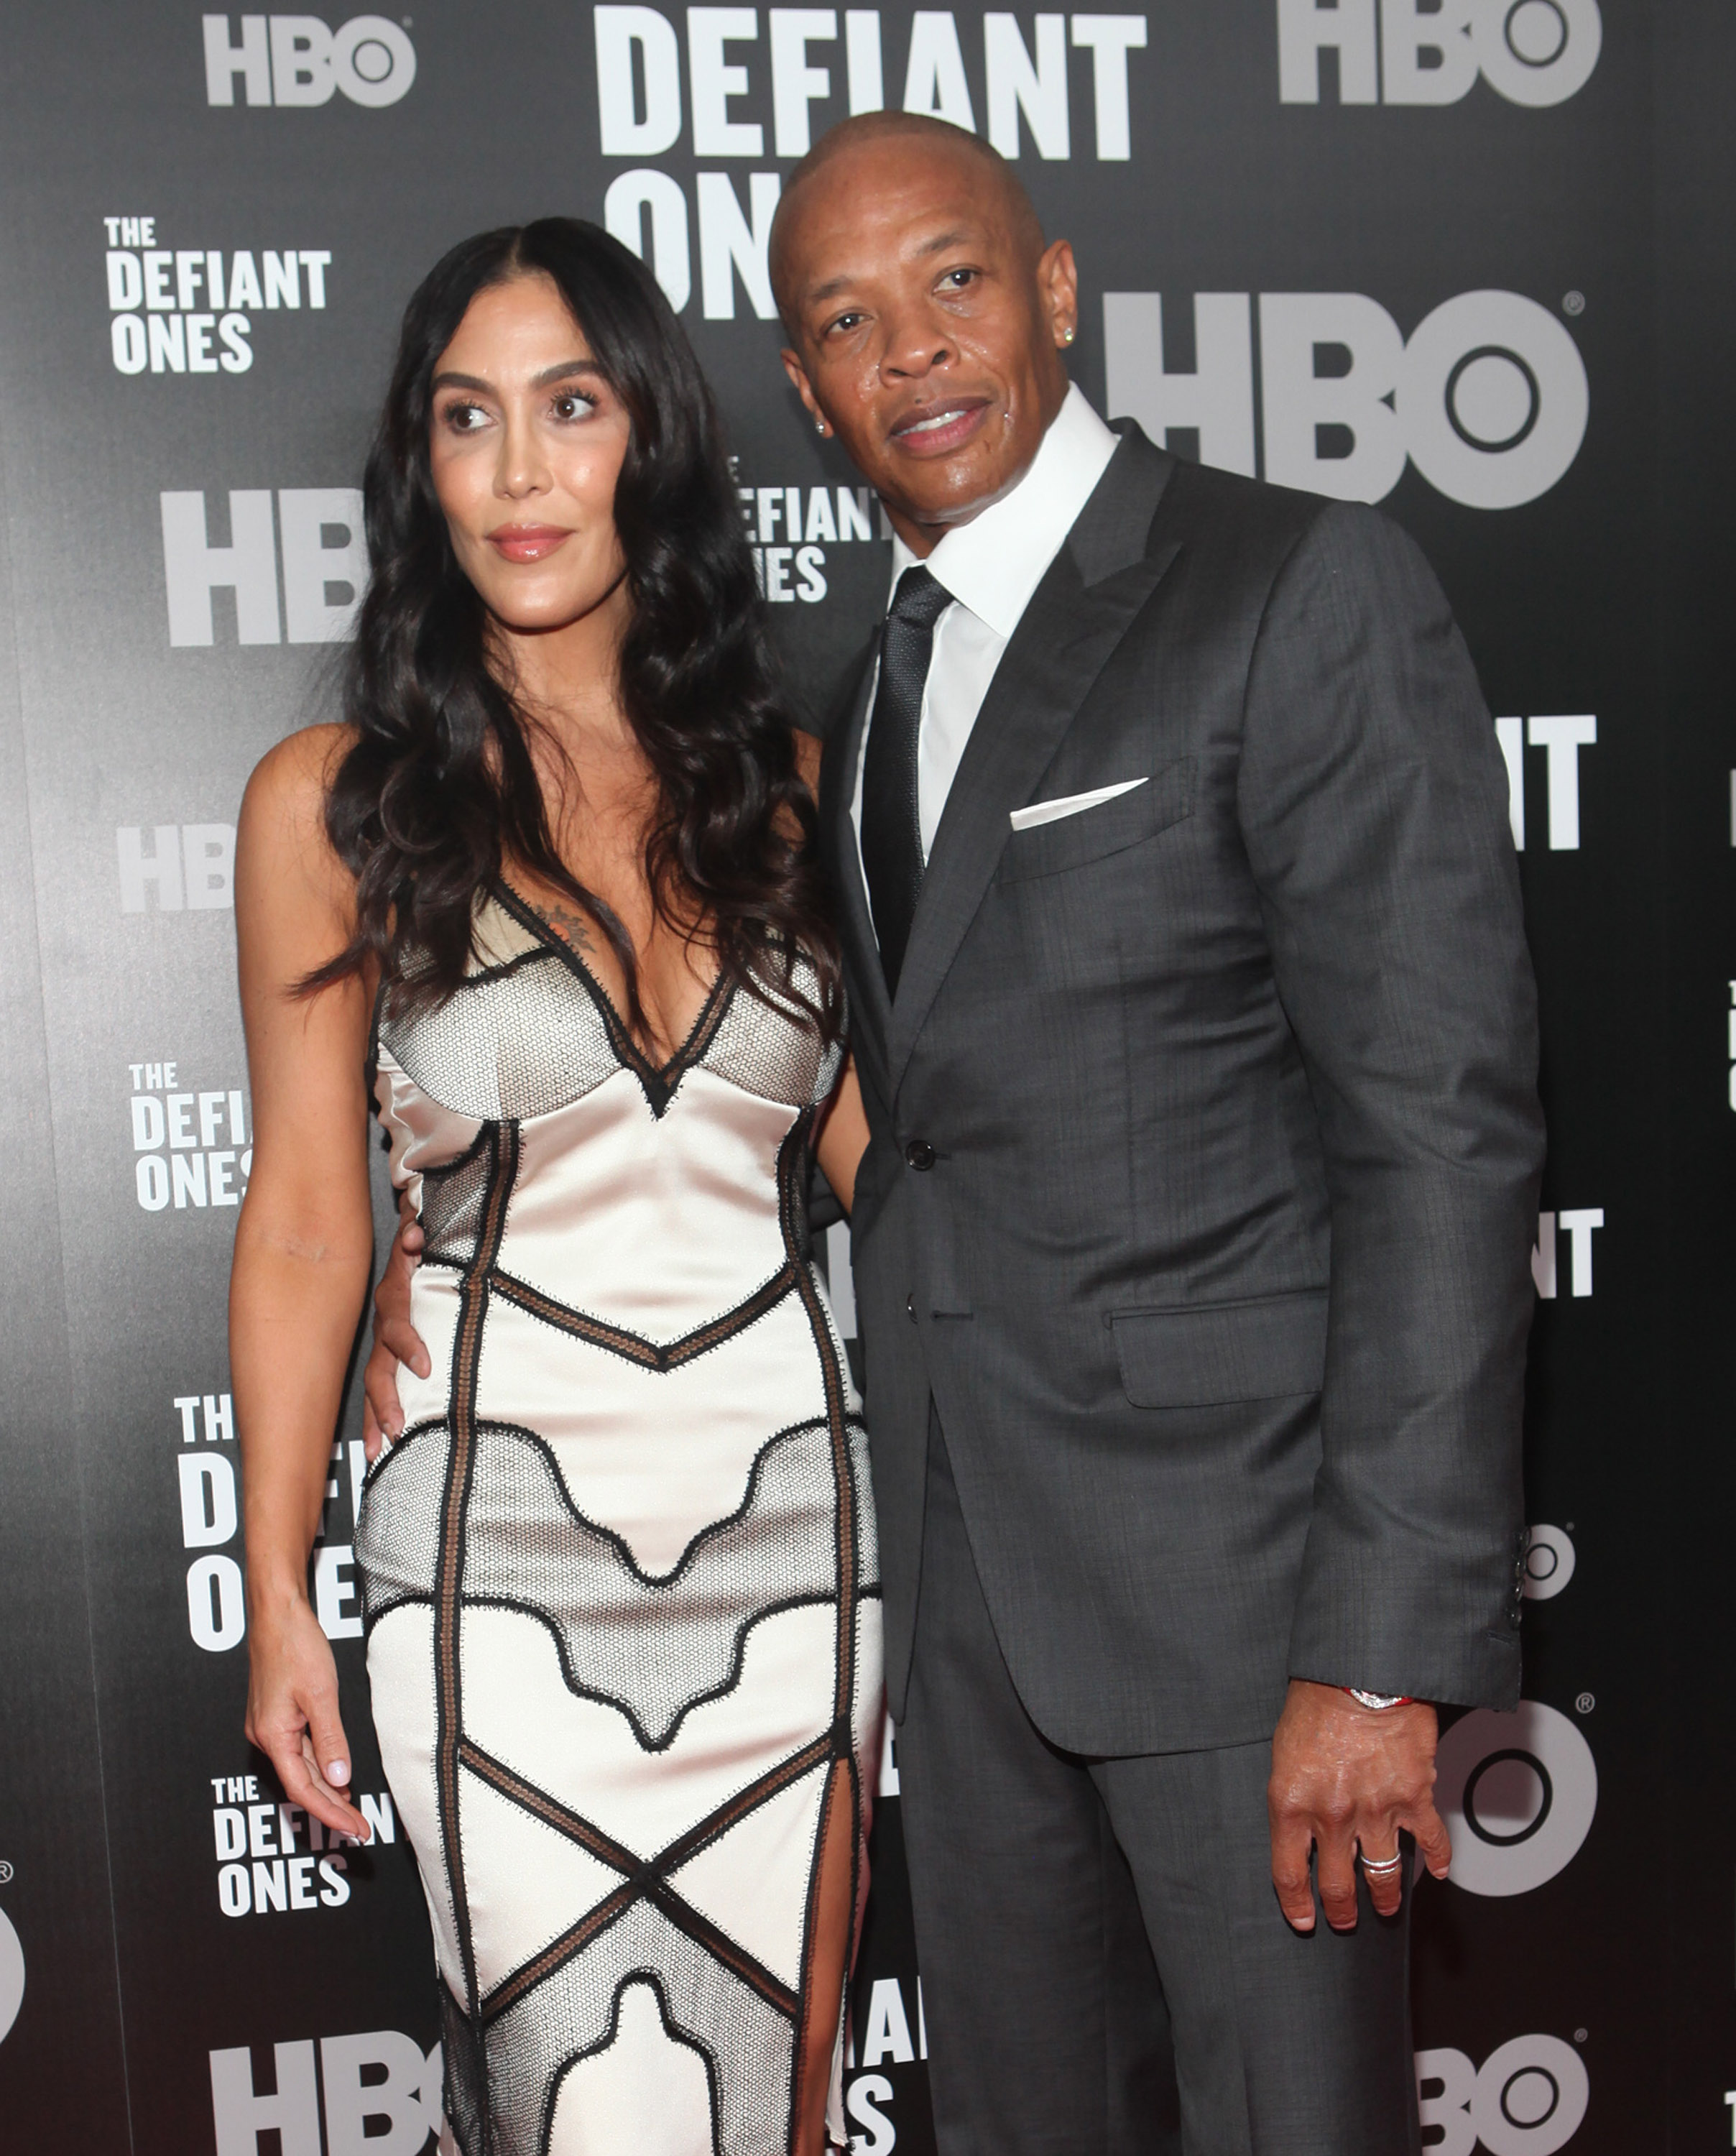 Nicole Young and Dr. Dre attend "The Defiant Ones" premiere on June 27, 2017 in New York City | Source: Getty Images